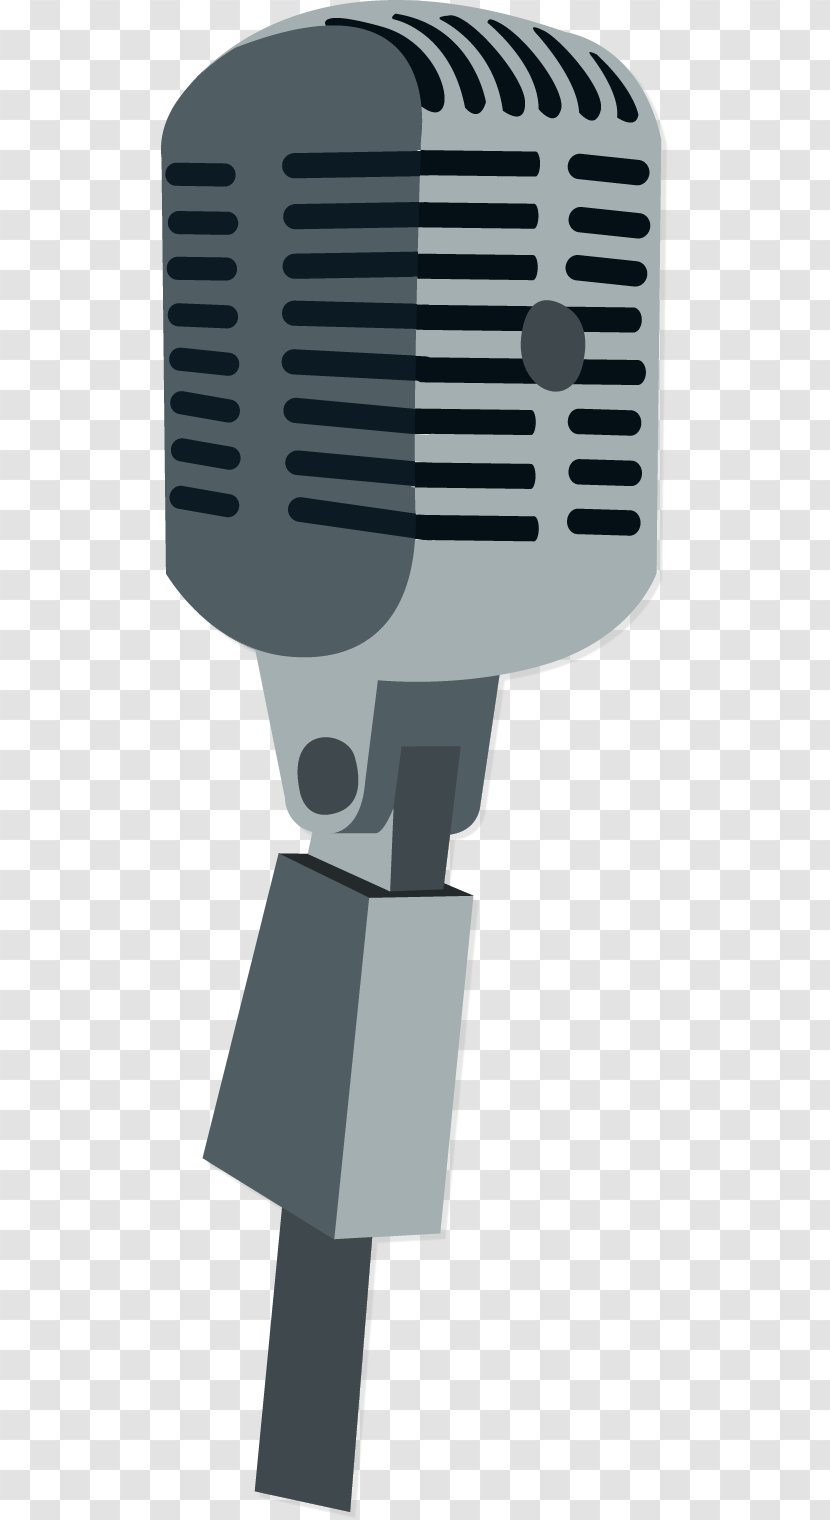 Microphone Cartoon Icon - Flower - Old Transparent PNG